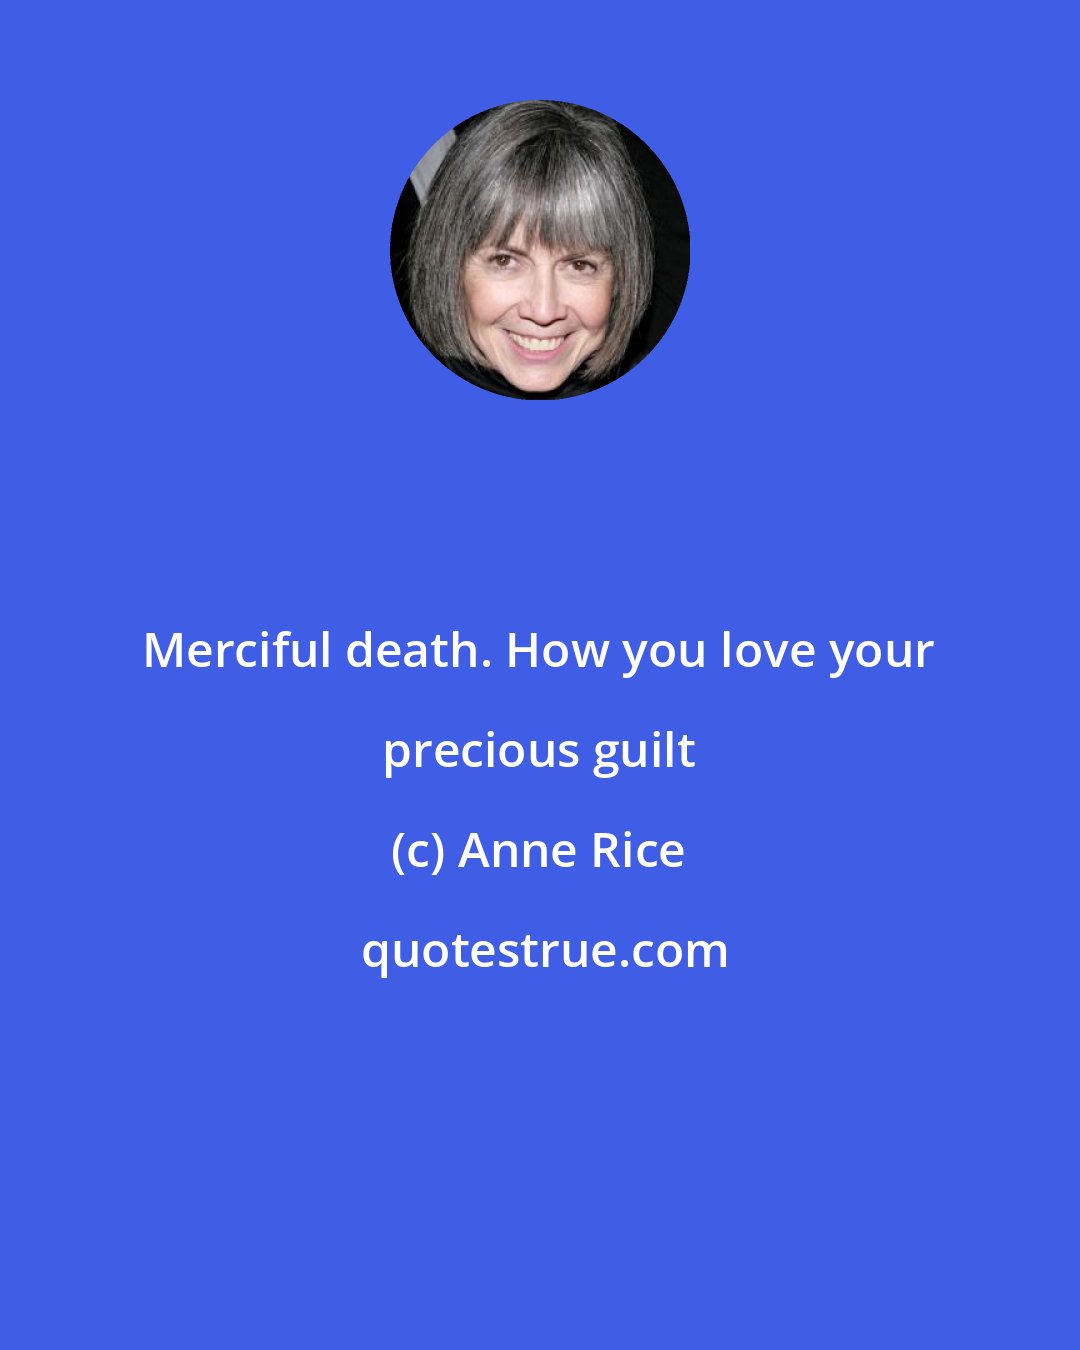 Anne Rice: Merciful death. How you love your precious guilt